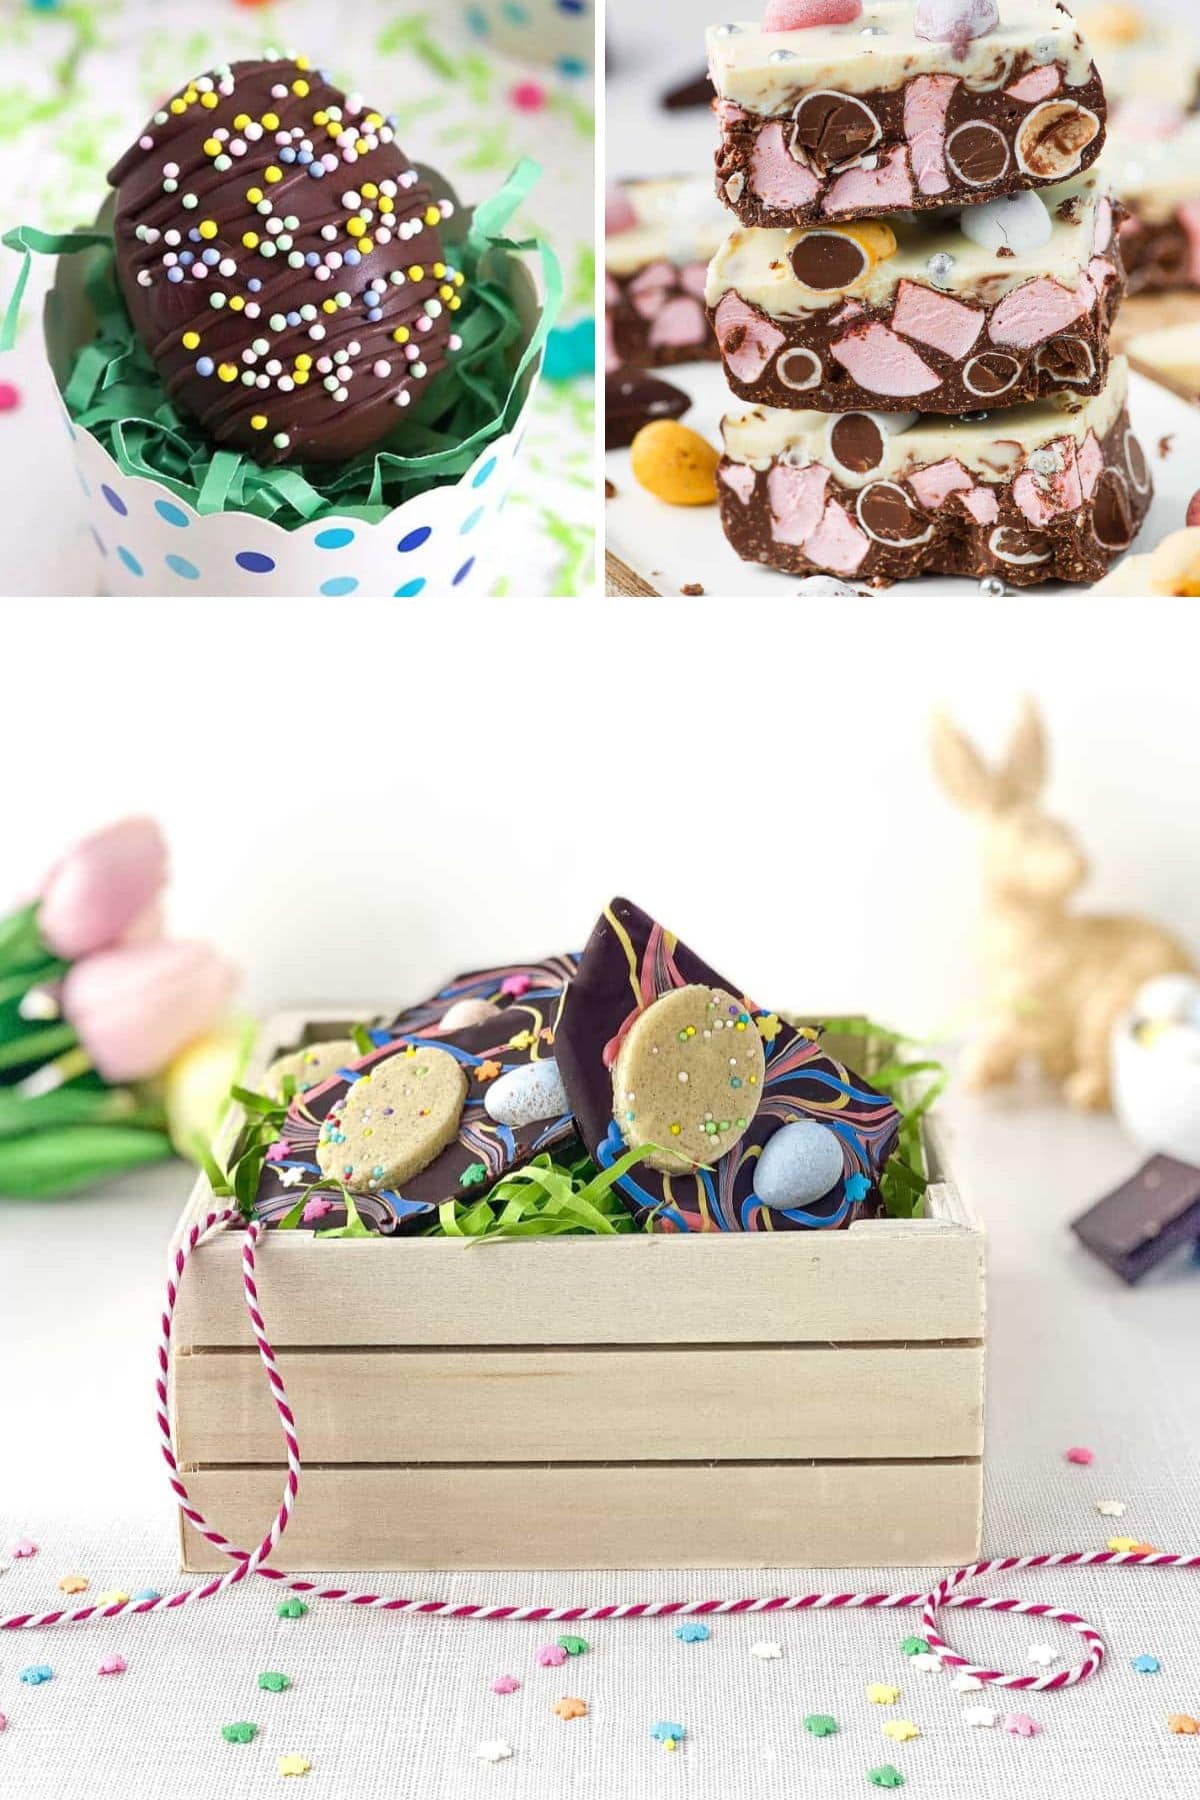 chocolate peanut butter eggs, chocolate rocky road with pink marshmallows and chocolate eggs, and chocolate bark with easter sugar cookie dough.